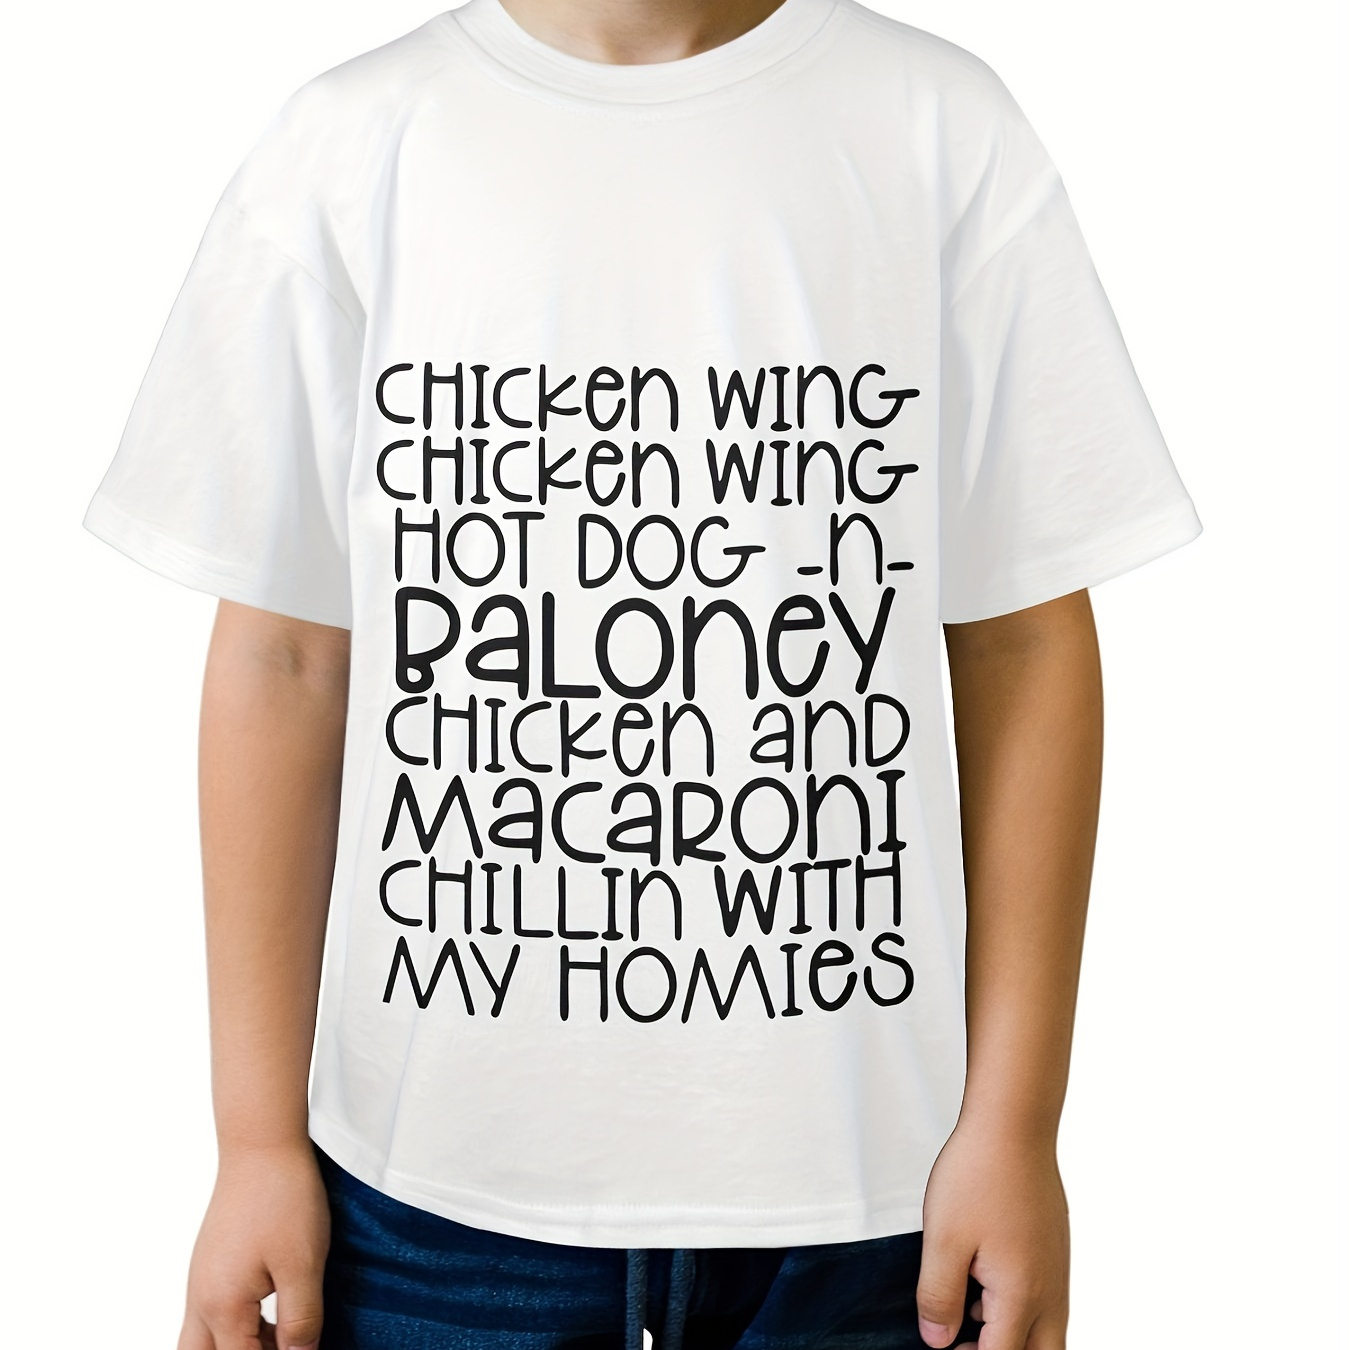 

Boy's Pure Cotton Summer Casual Comfy T-shirt - Chicken Wing Hot Dog... Print Short Sleeve Crew Neck Tee Creative Gift